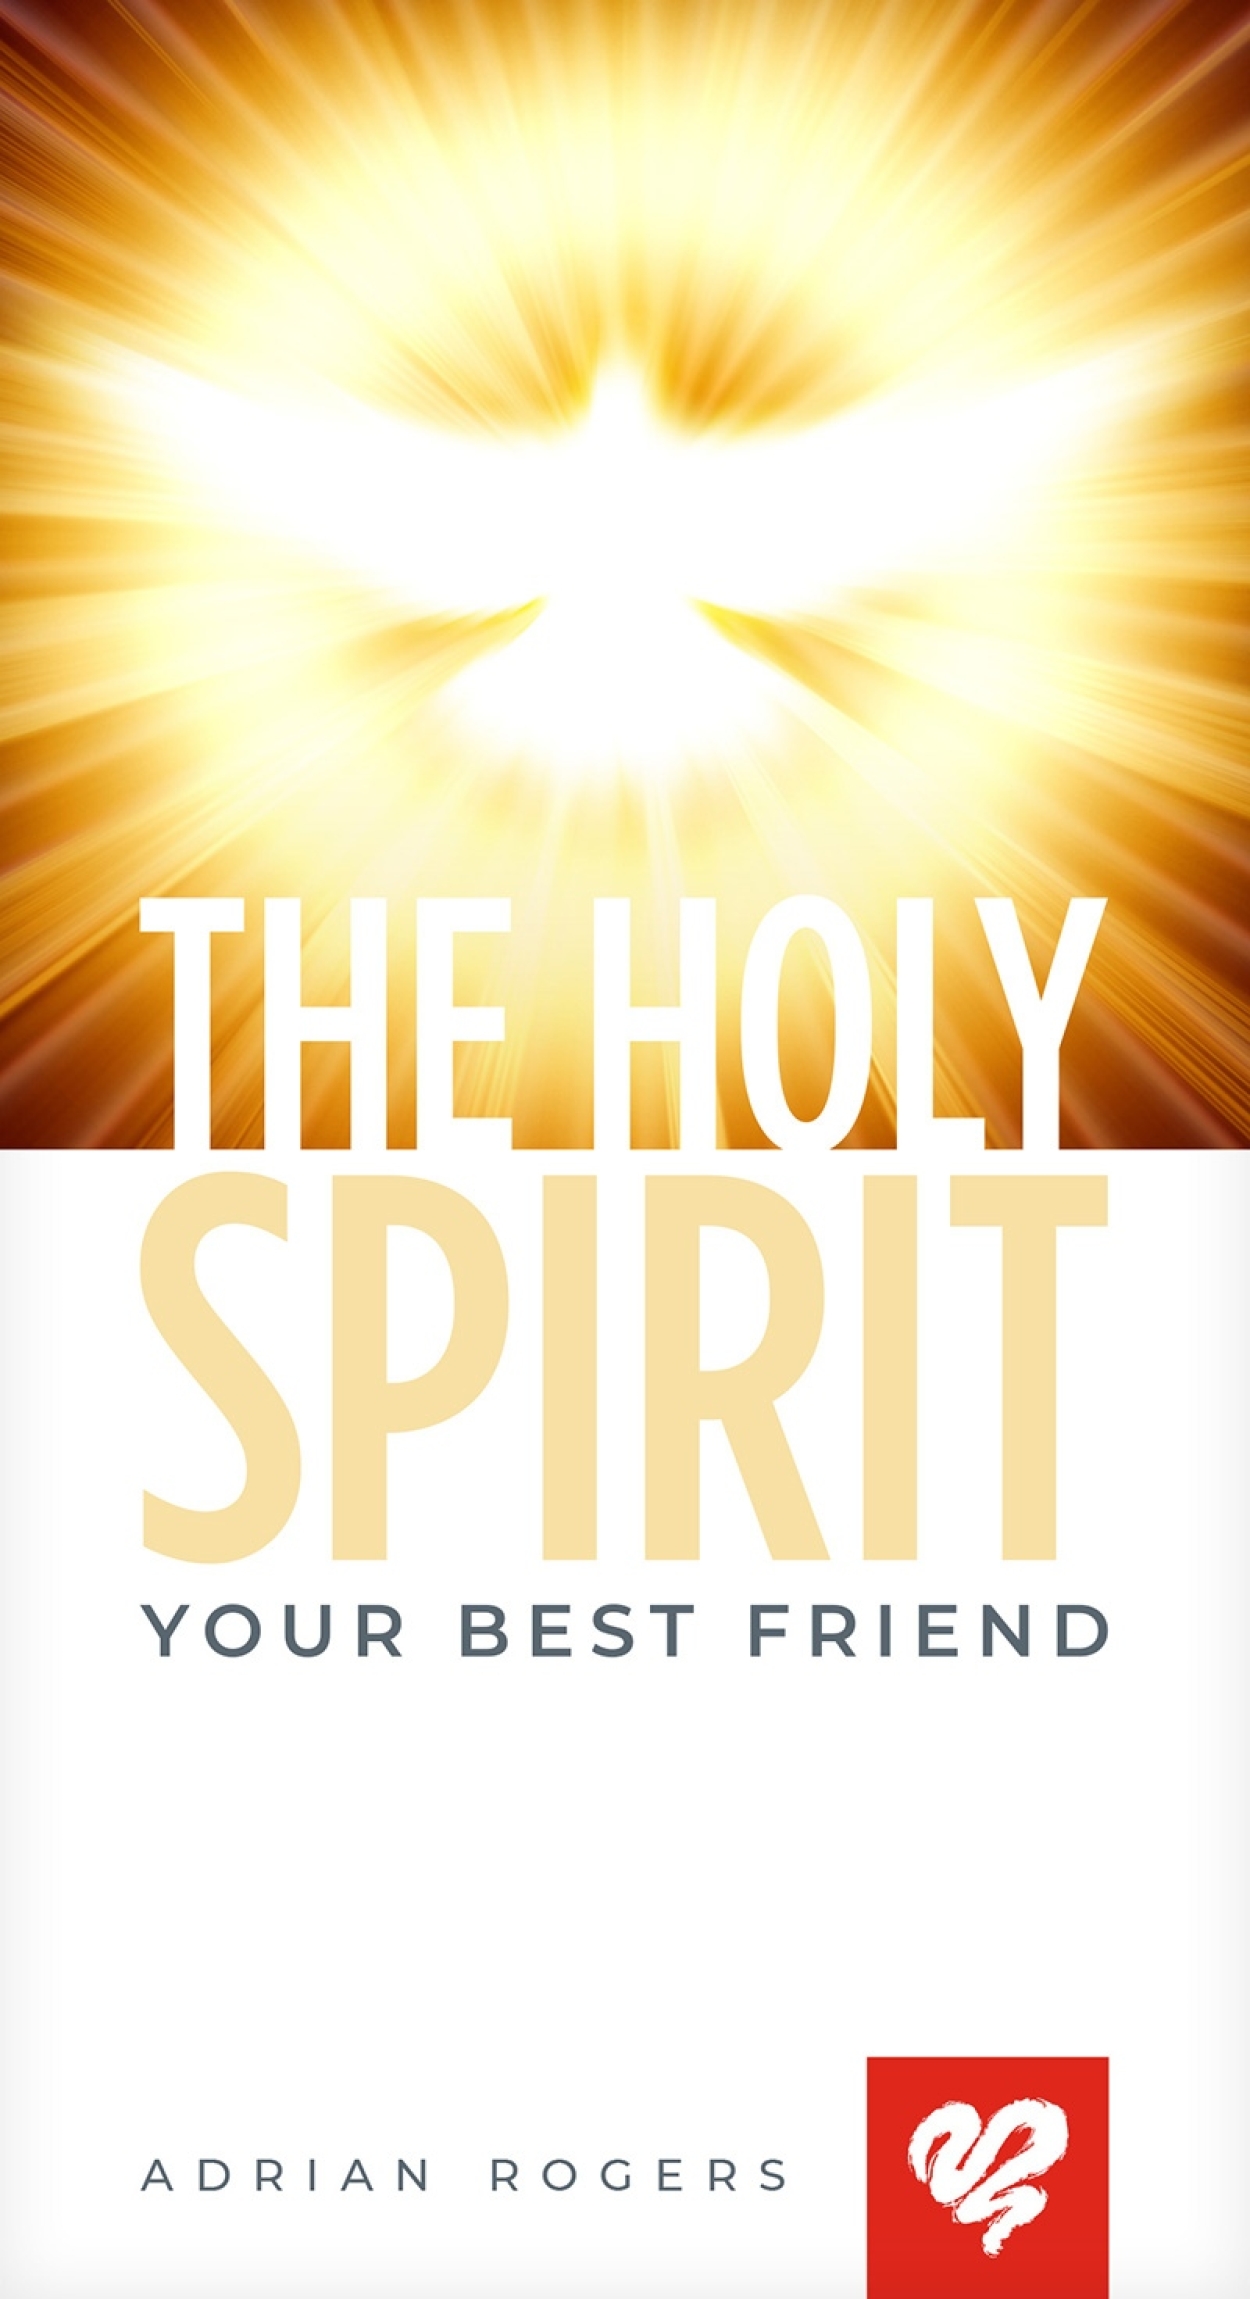 The holy spirit your best friend booklet K137